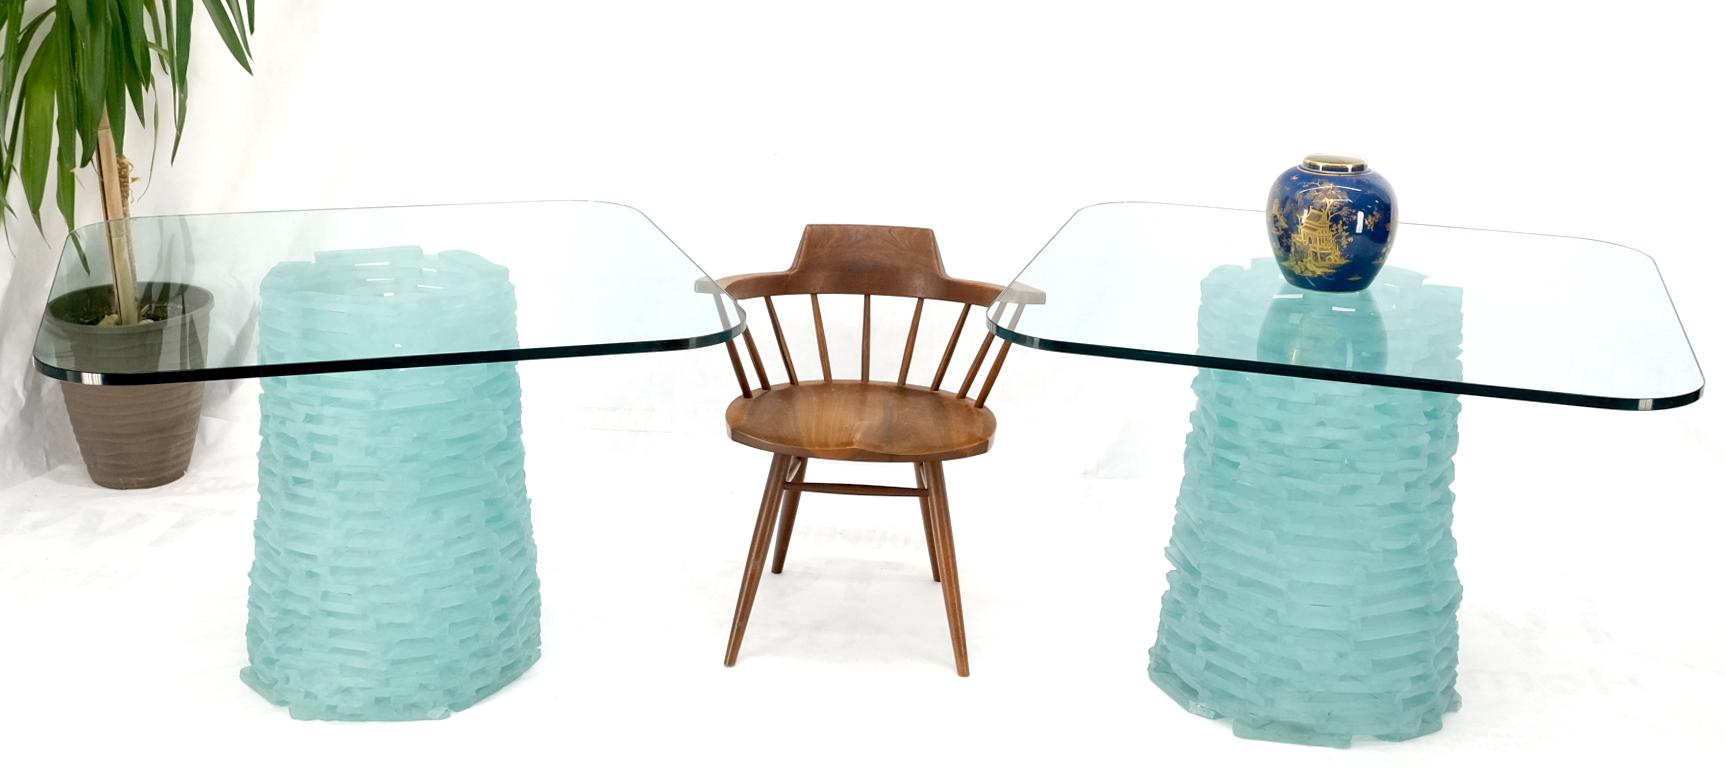 Pair of Fused Glass Blocks Pedestal Bases Rounded Square Tops Dining Game Table In Good Condition For Sale In Rockaway, NJ